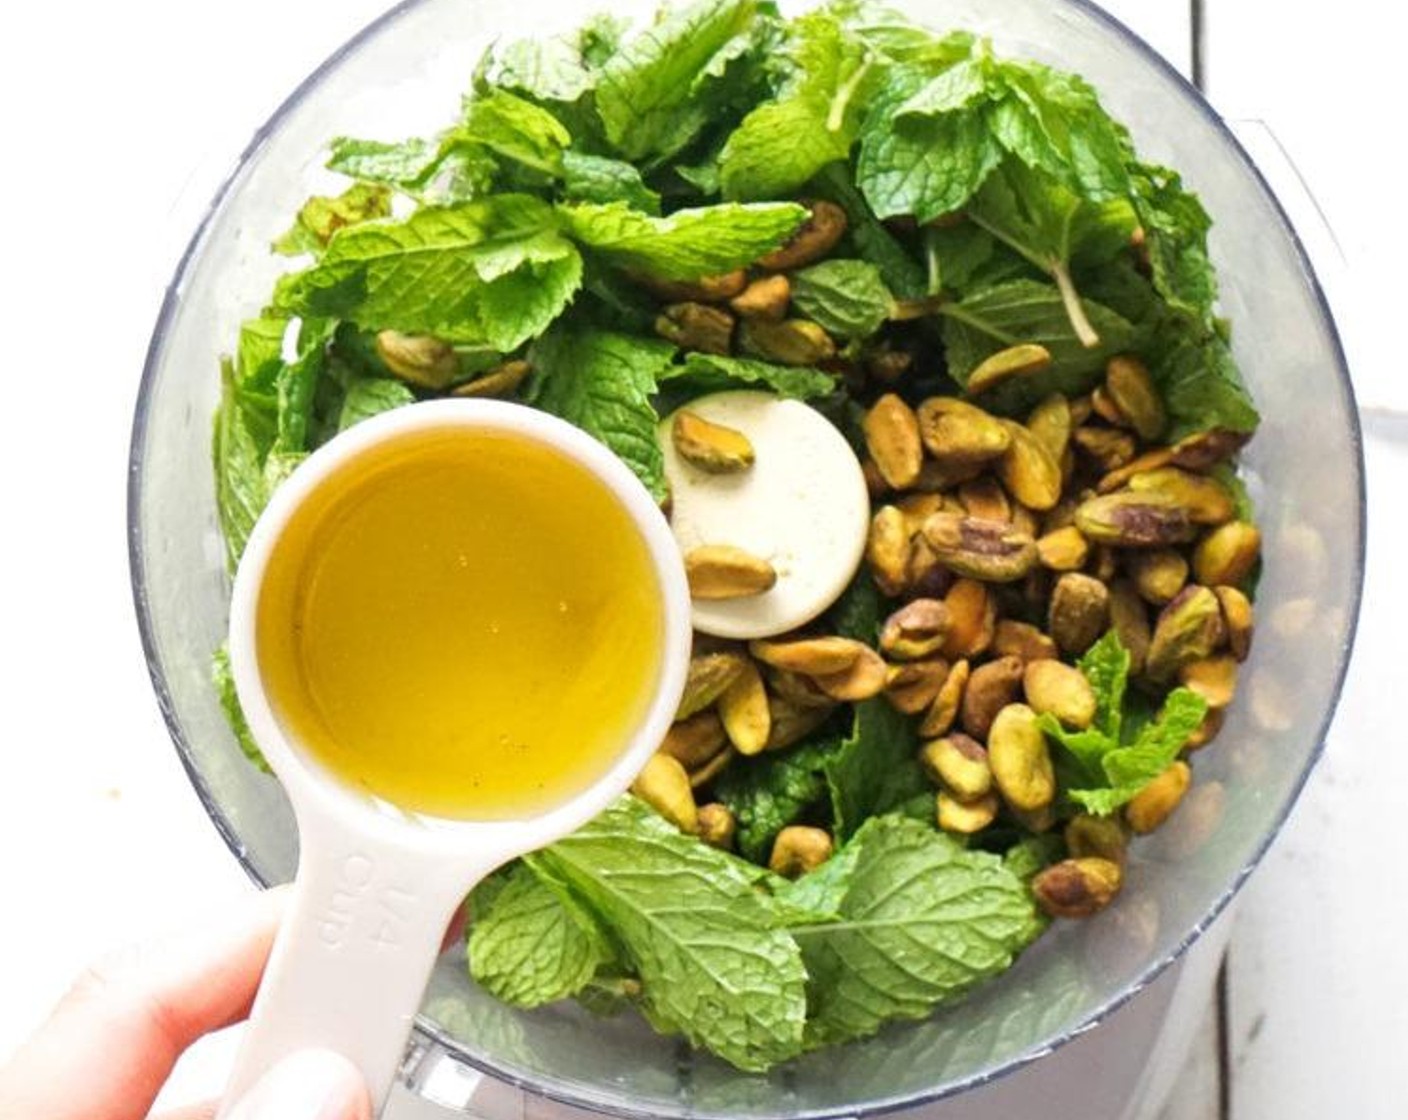 step 1 Combine the Fresh Mint Leaves (1 cup), Unsalted Pistachios (1/4 cup), and Garlic (1 clove) in a food processor. Process until ground, then pour the Olive Oil (1/4 cup) in a steady stream until desired consistency achieved.